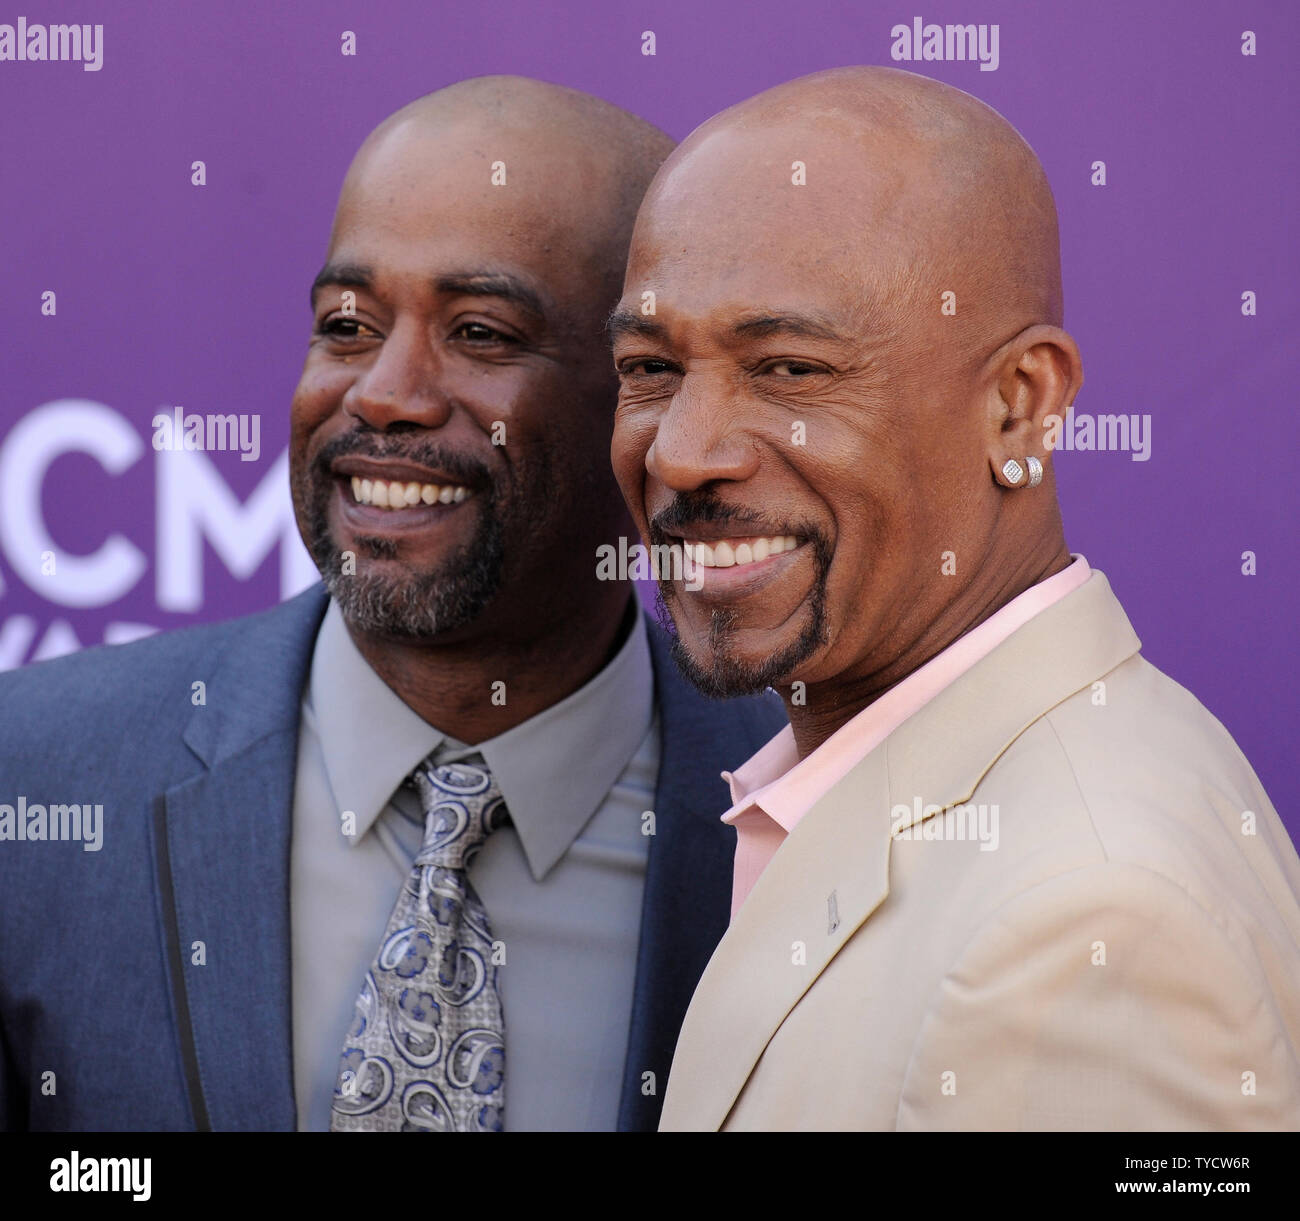 Musician Darius Rucker and talk show host Montel Williams arrive at the 47th annual Academy of Country Music Awards at the MGM Hotel in Las Vegas, Nevada on April 1, 2012.  UPI/David Becker Stock Photo